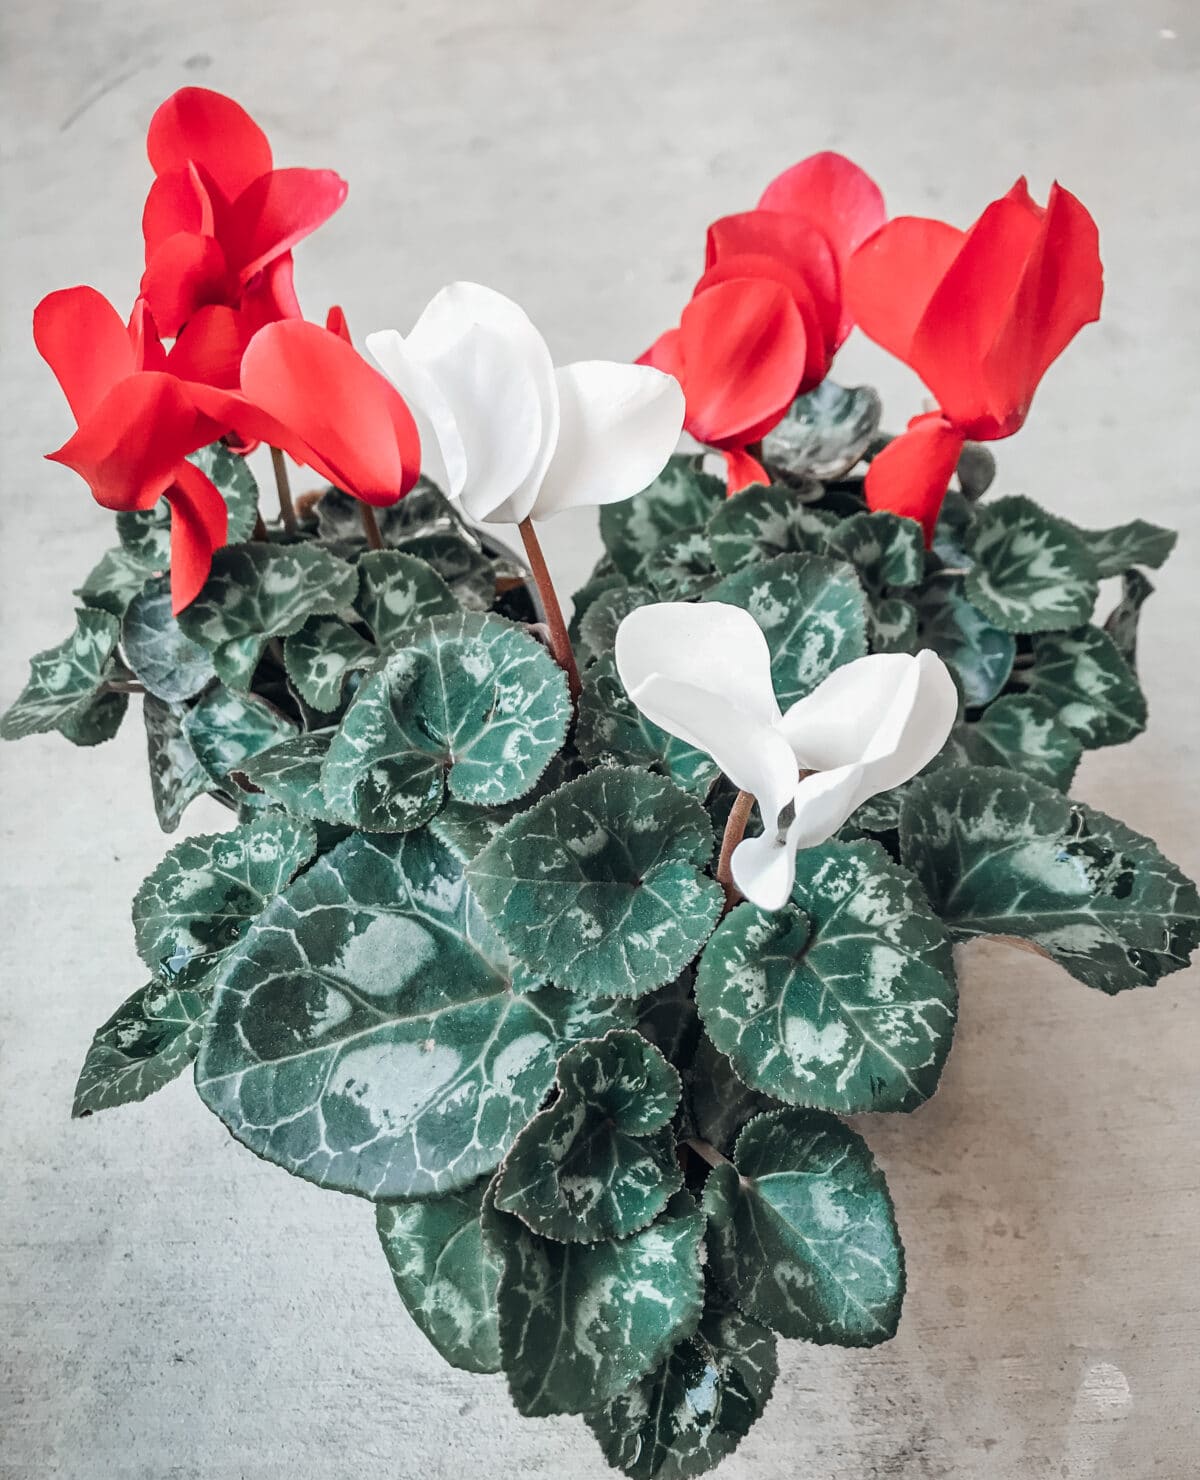 Learn all about cyclamen care with this post!